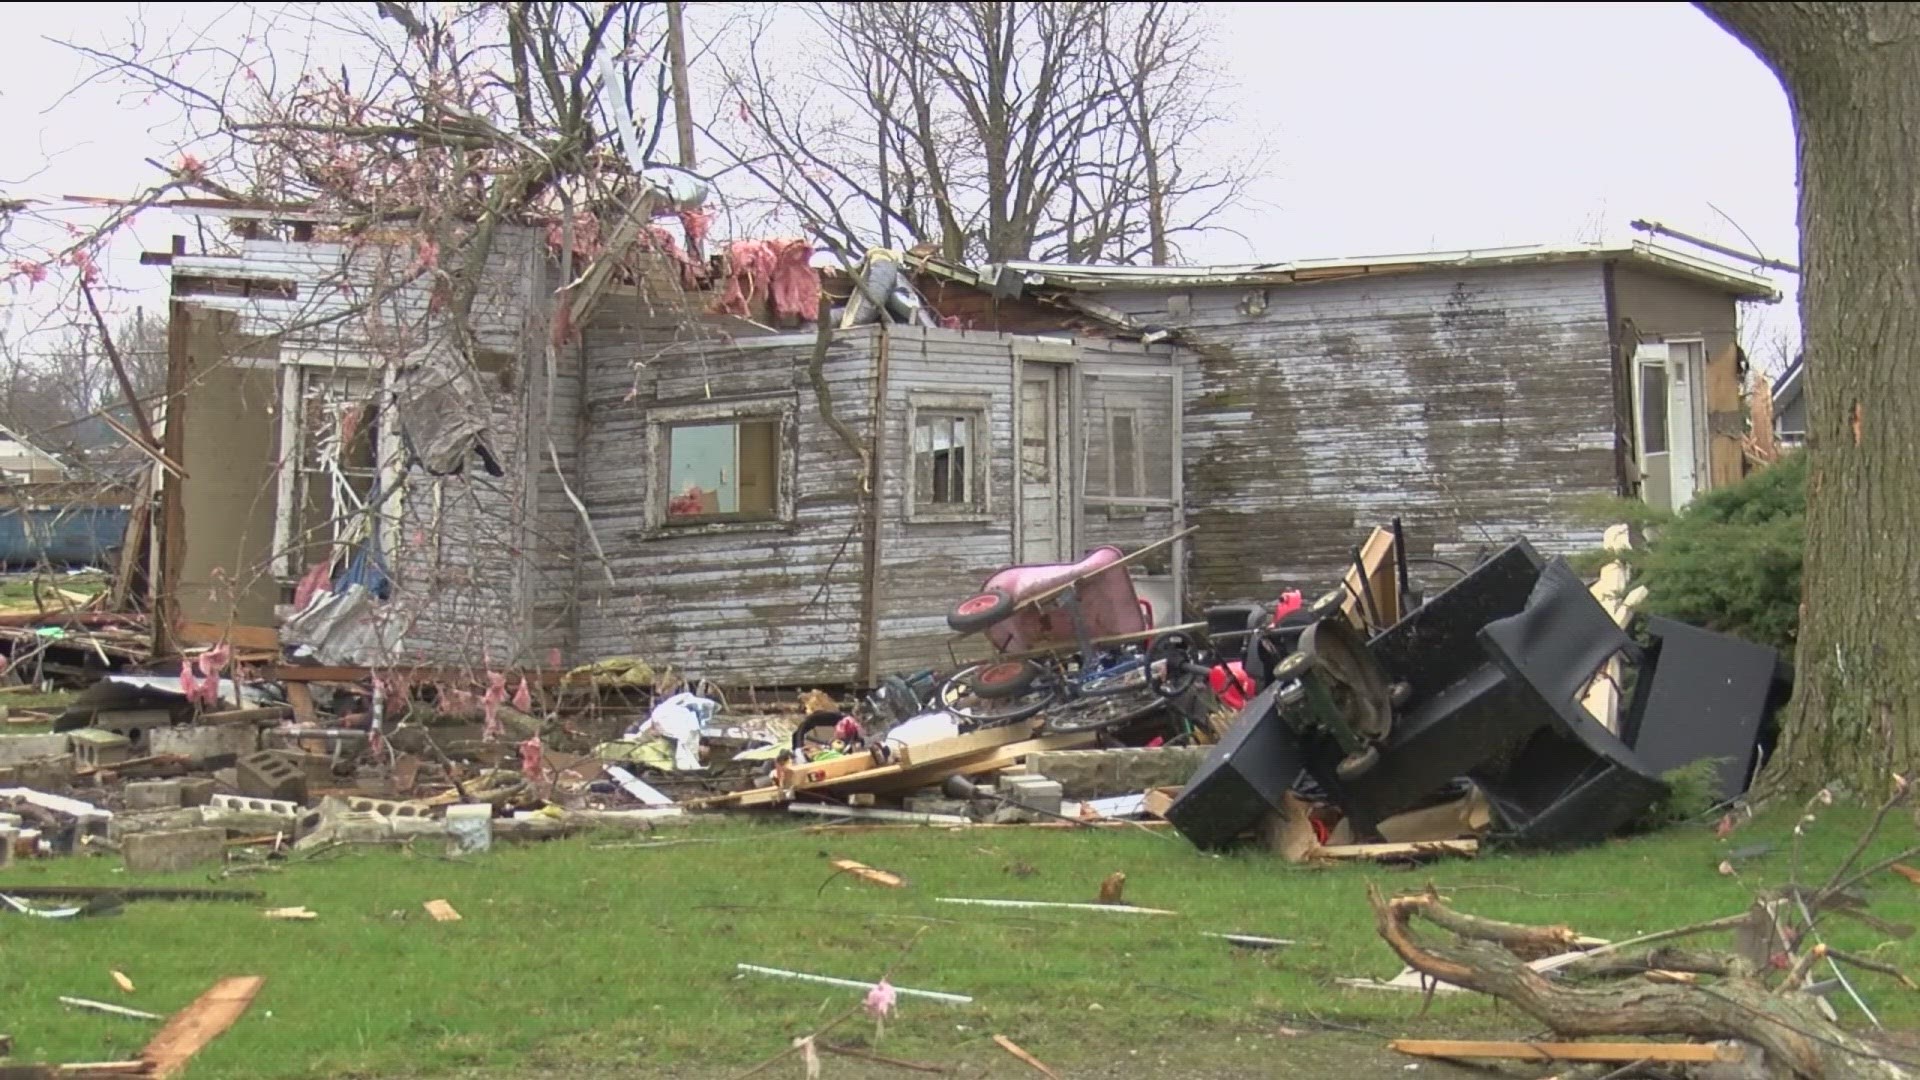 Additional tornadoes may be confirmed, with ones confirmed to have hit Hancock and Crawford counties and a third devastating tornado near Indian Lake in Logan County